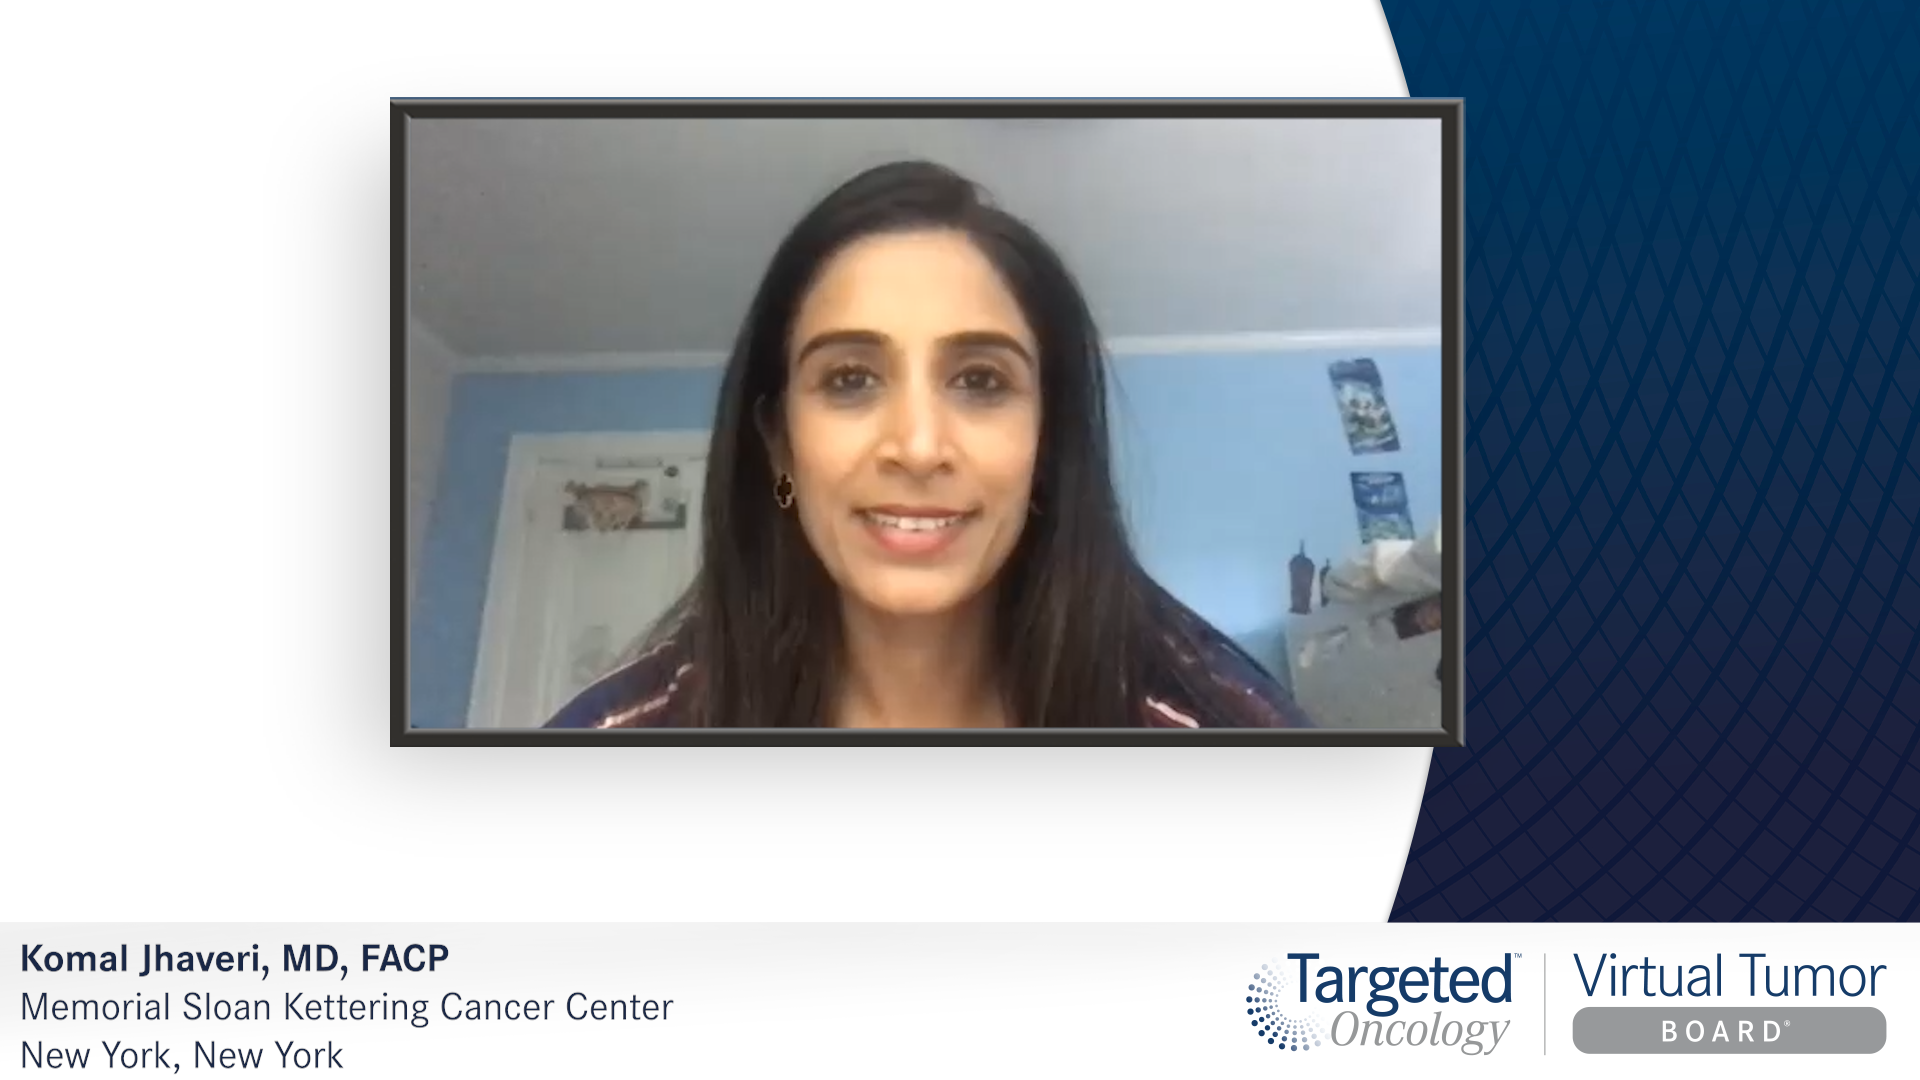 Case 2: Adverse Effects of Treatments for HER2+ Breast Cancer